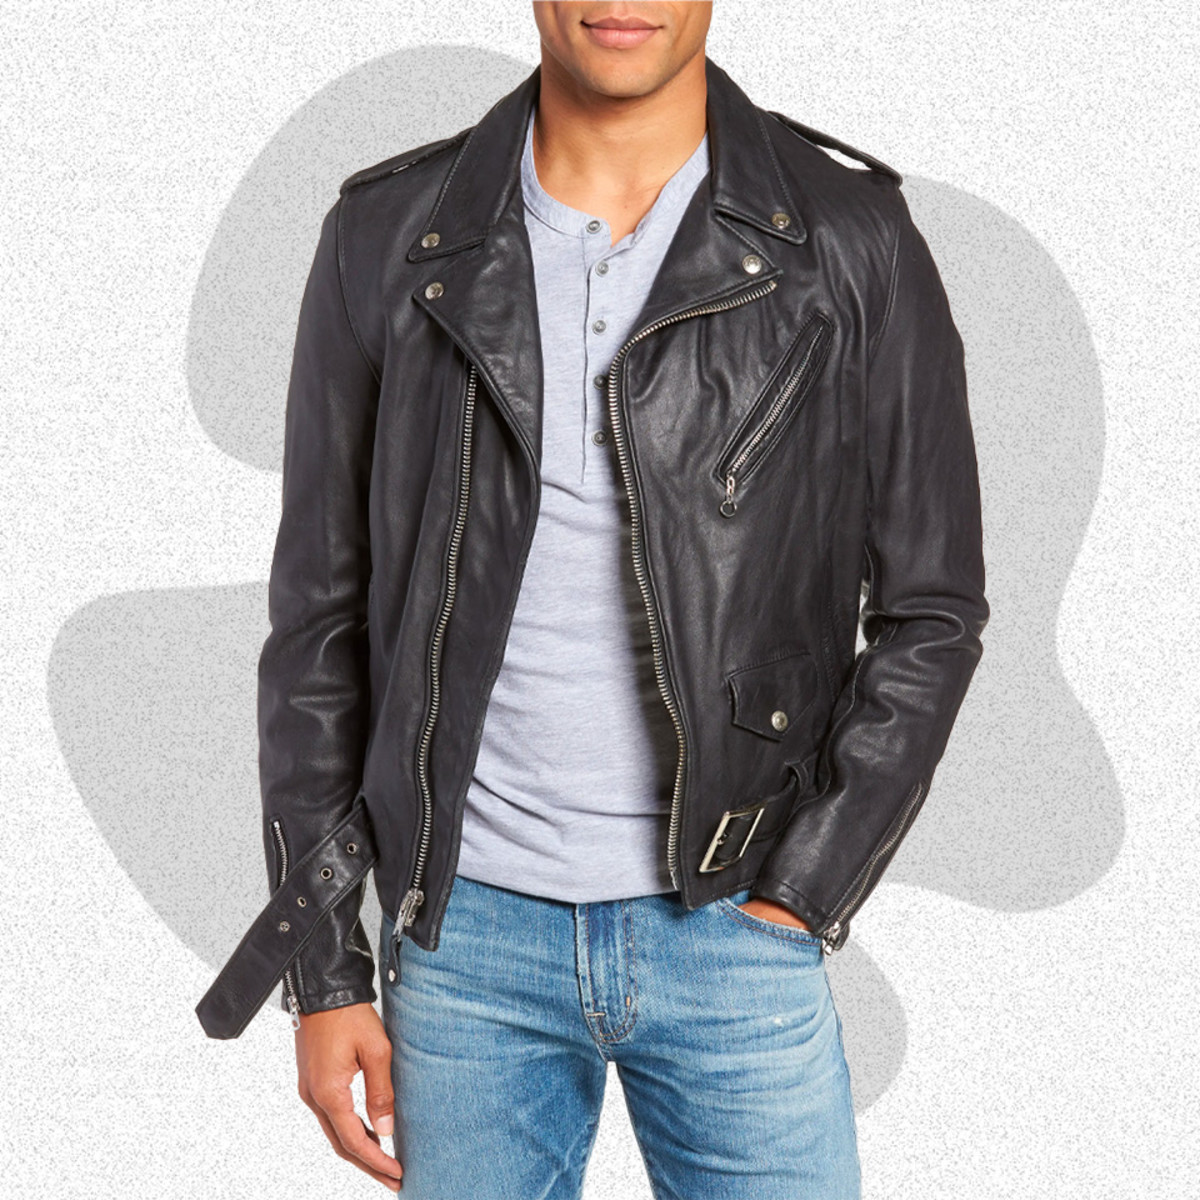 13 Best Leather Jackets For Men 2023 - Forbes Vetted